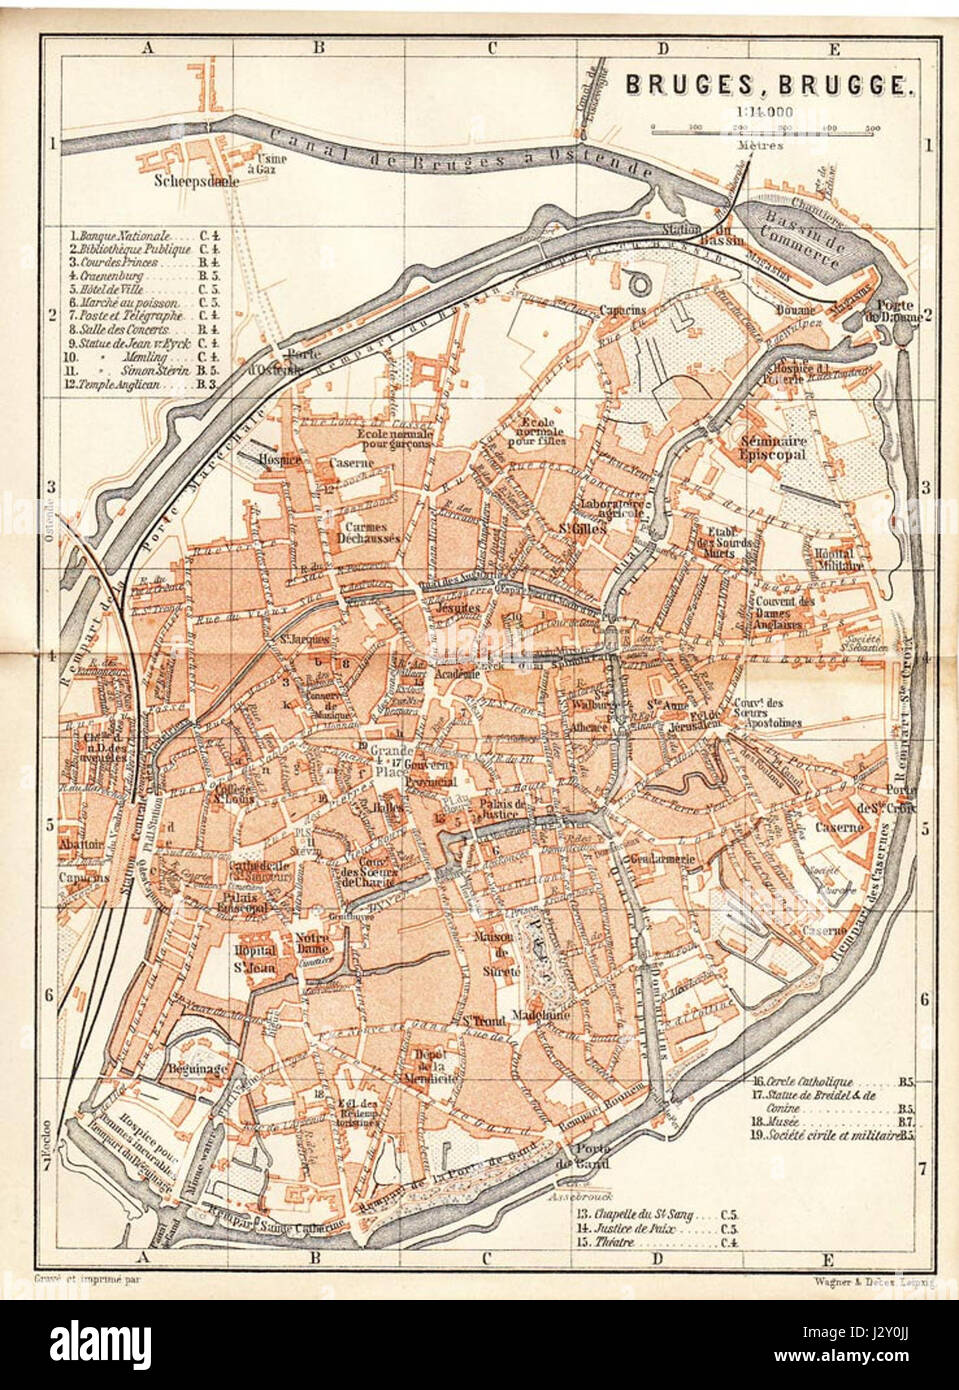 Bruges by wagner and debes, 1888 Stock Photo